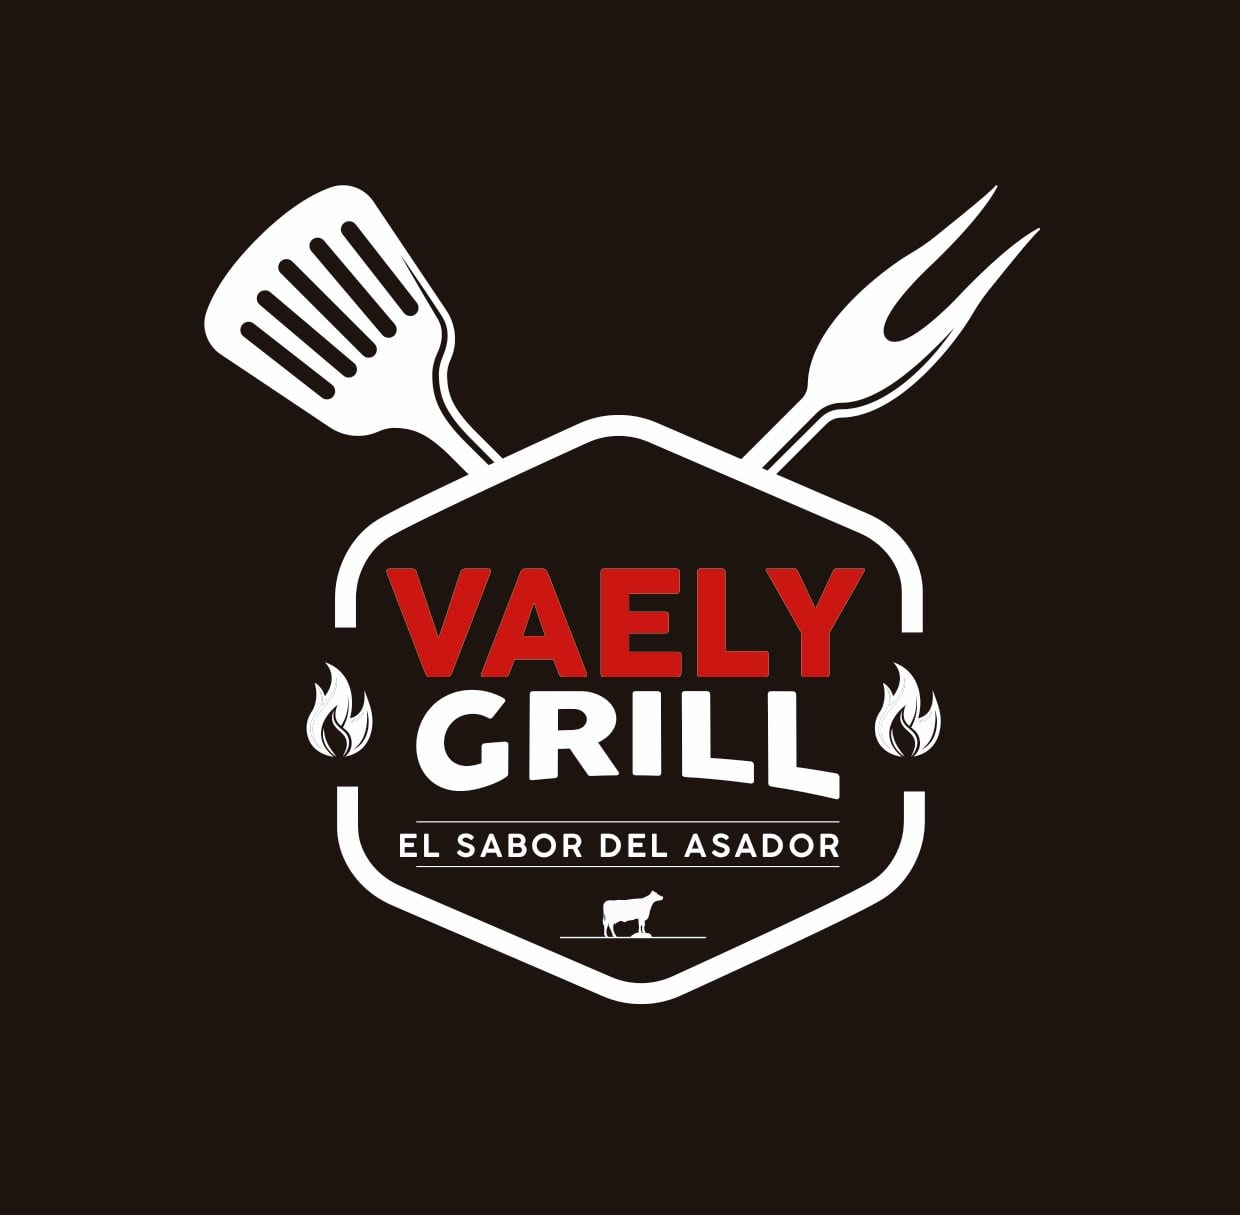 Vaely Grill